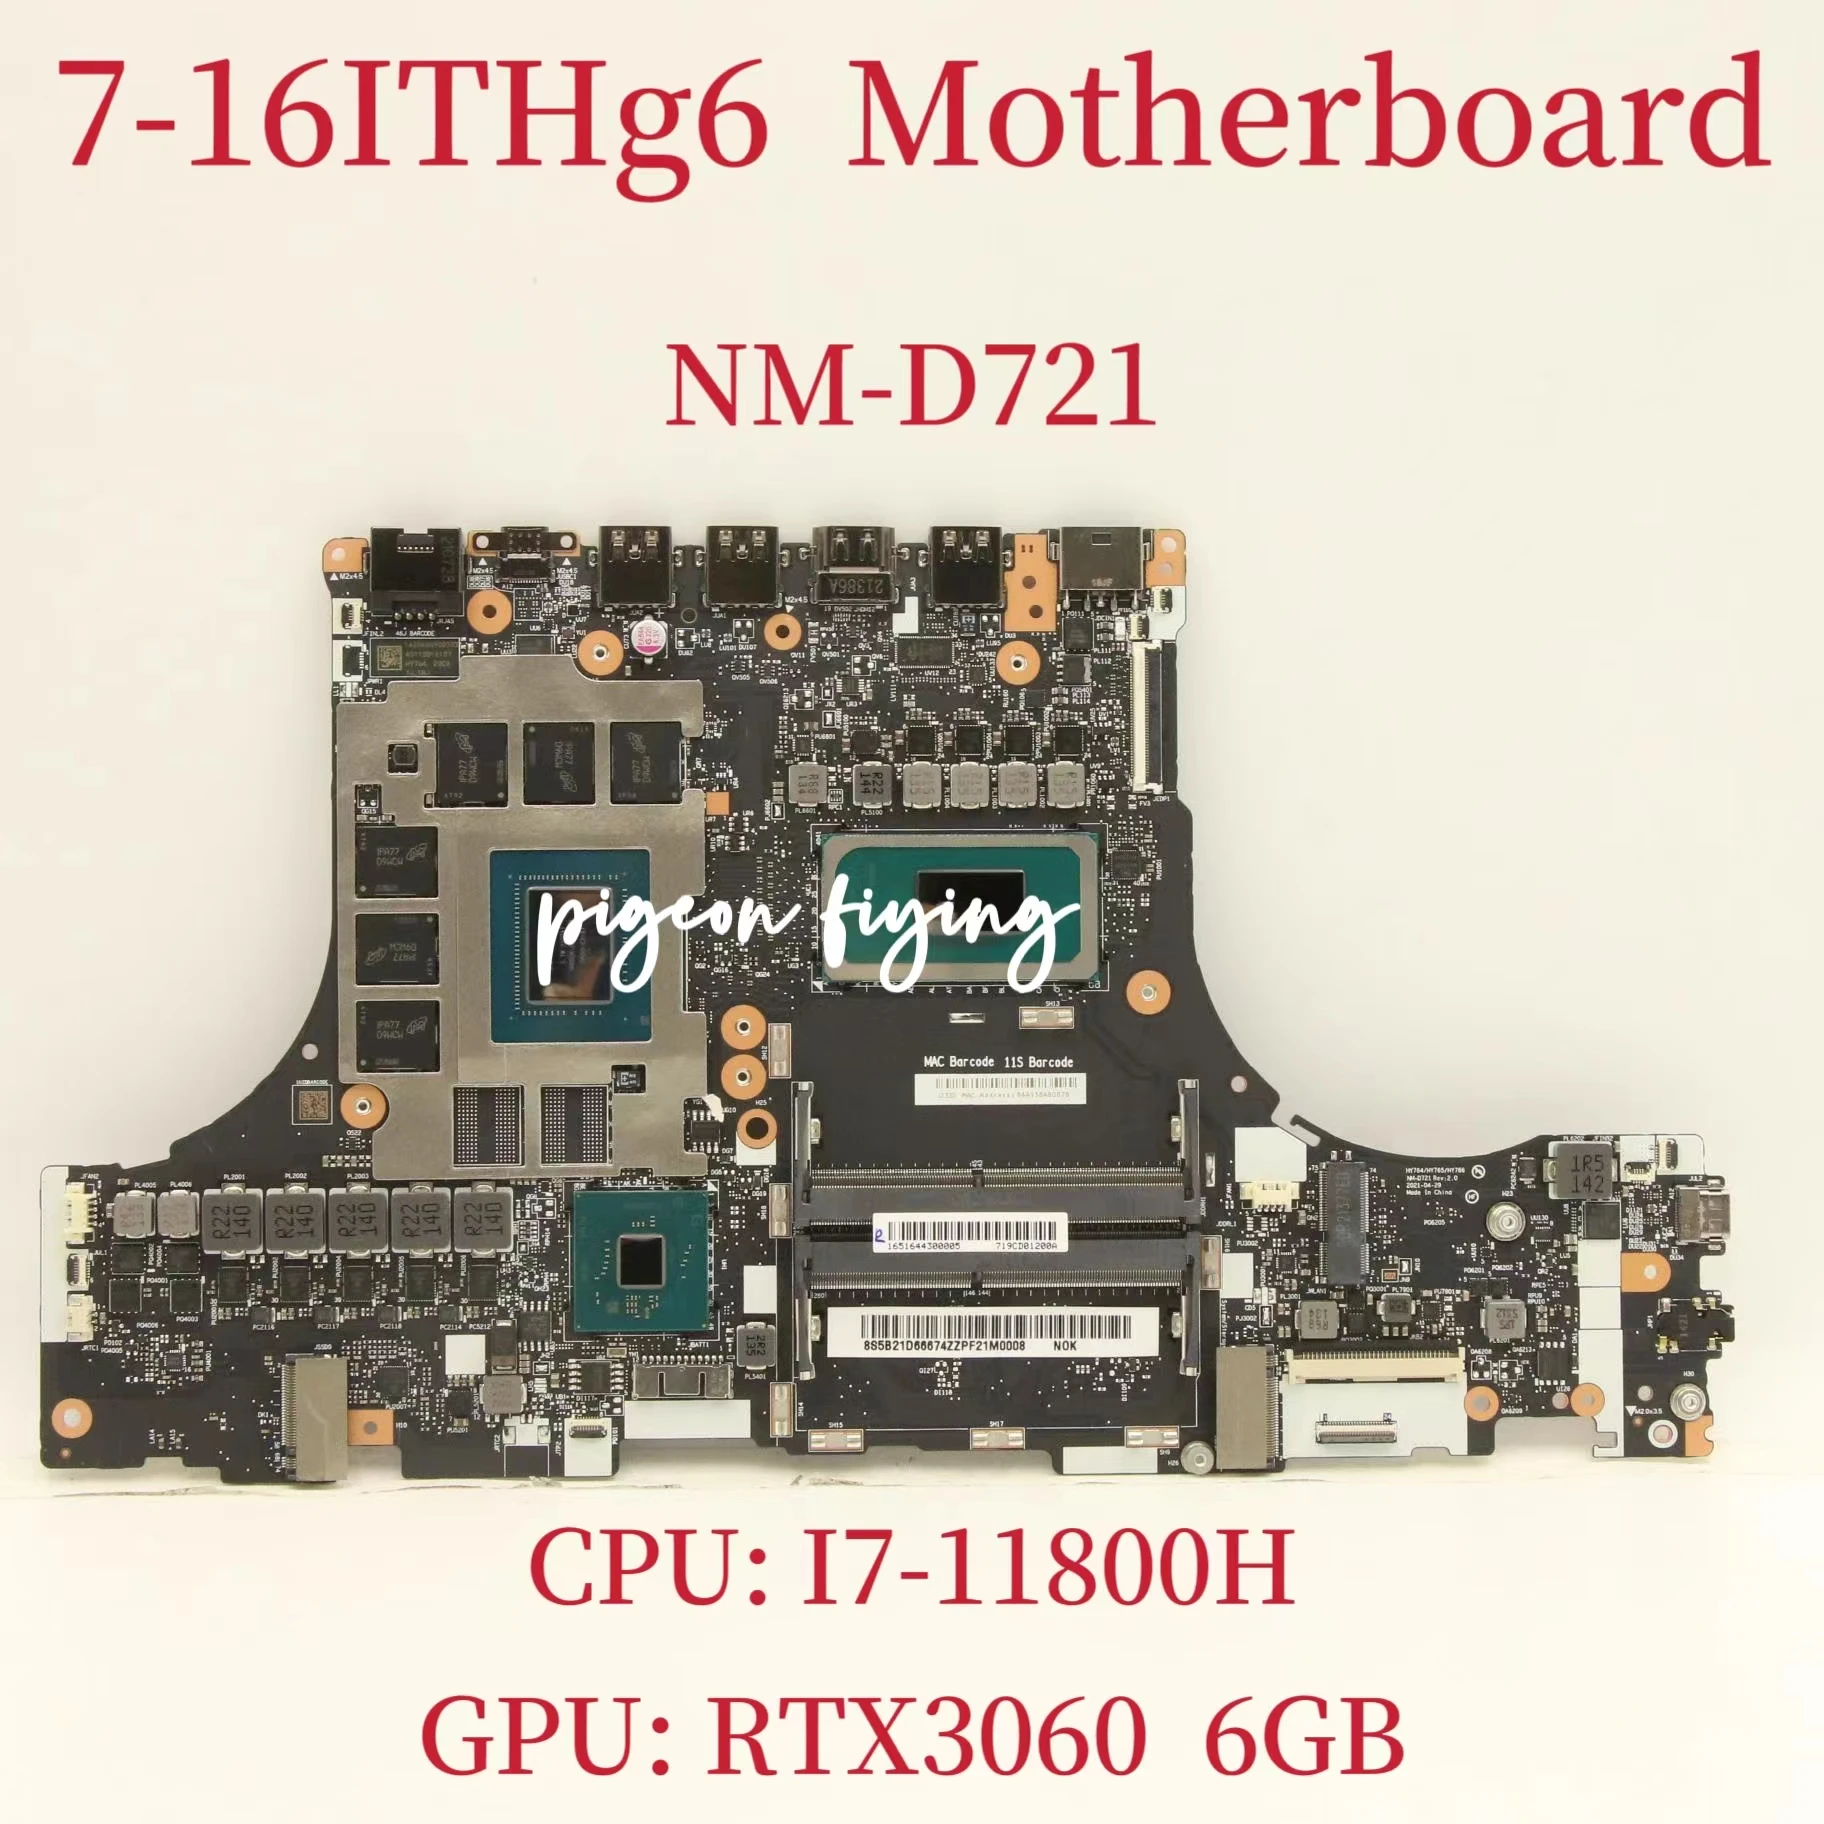 

NM-D721 Mainboard For Lenovo Legion 7-16ITHg6 Laptop Motherboard CPU:I7-11800H GPU:RTX3060 6GB 5B21D66674 100% Tested Fully Work